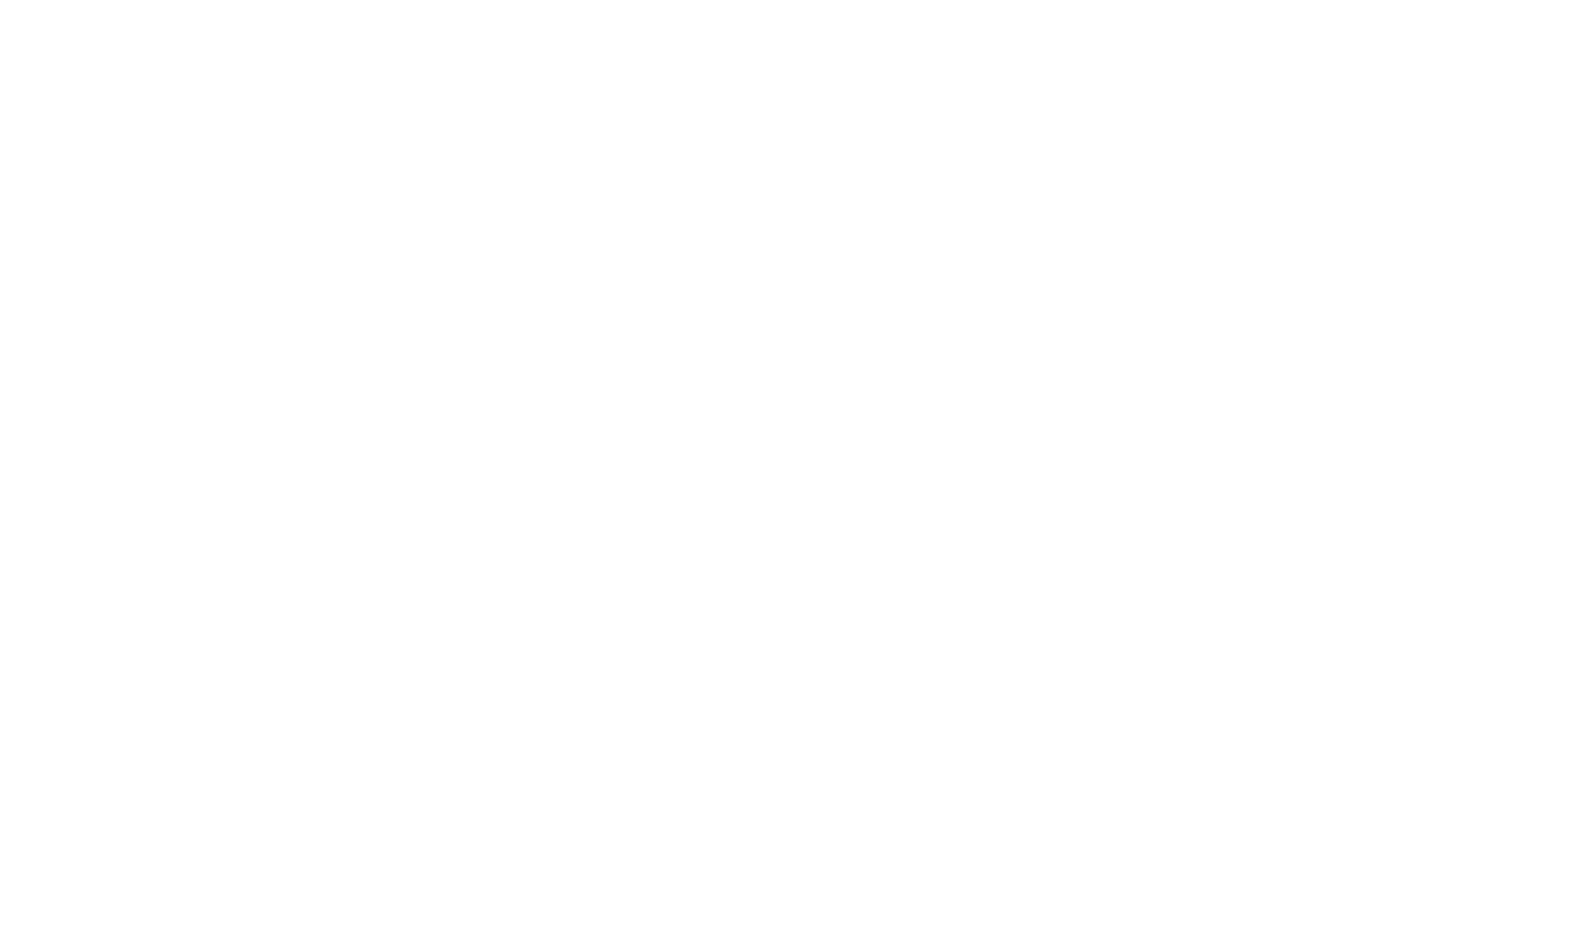 Yuexiu Property logo for dark backgrounds (transparent PNG)